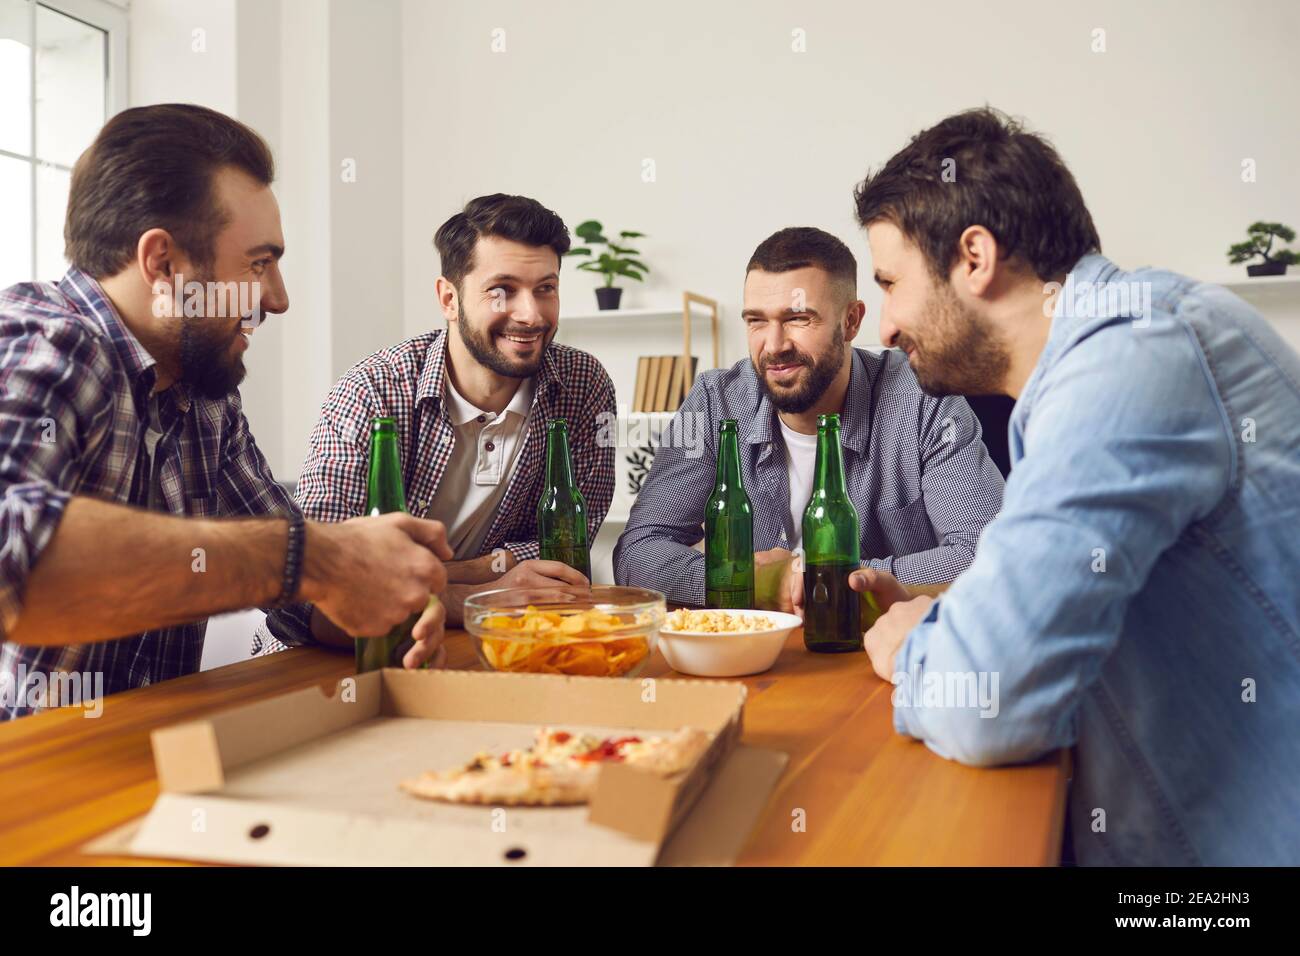 Four cheerful men friends having home party meeting with beer and pizza Stock Photo